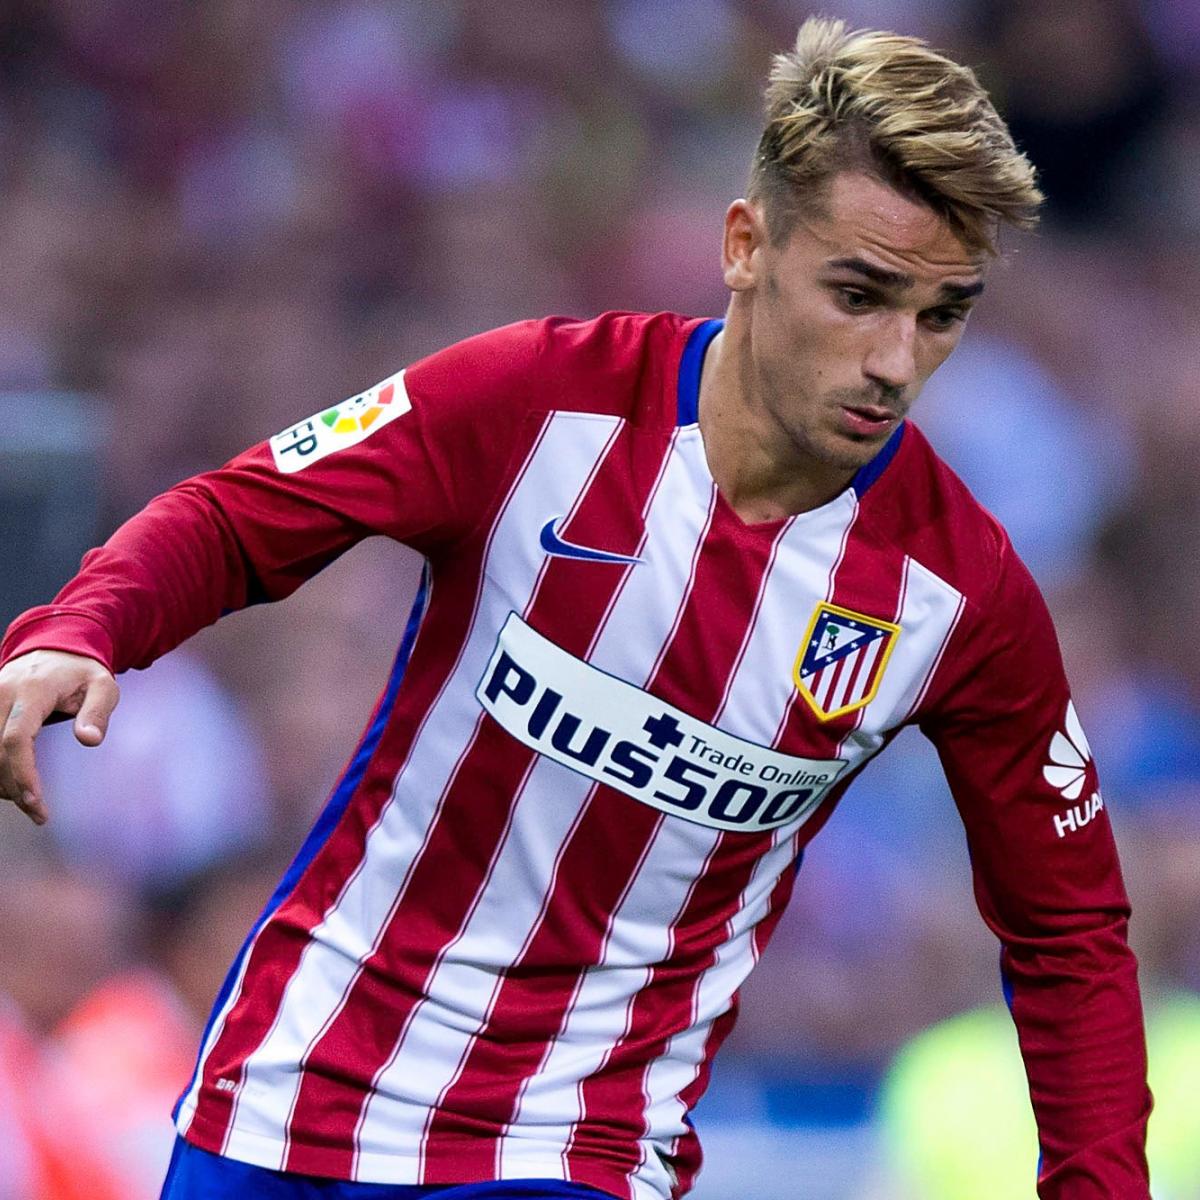 Atletico Ahead Of Opponents With Clever Antoine Griezmann Capture